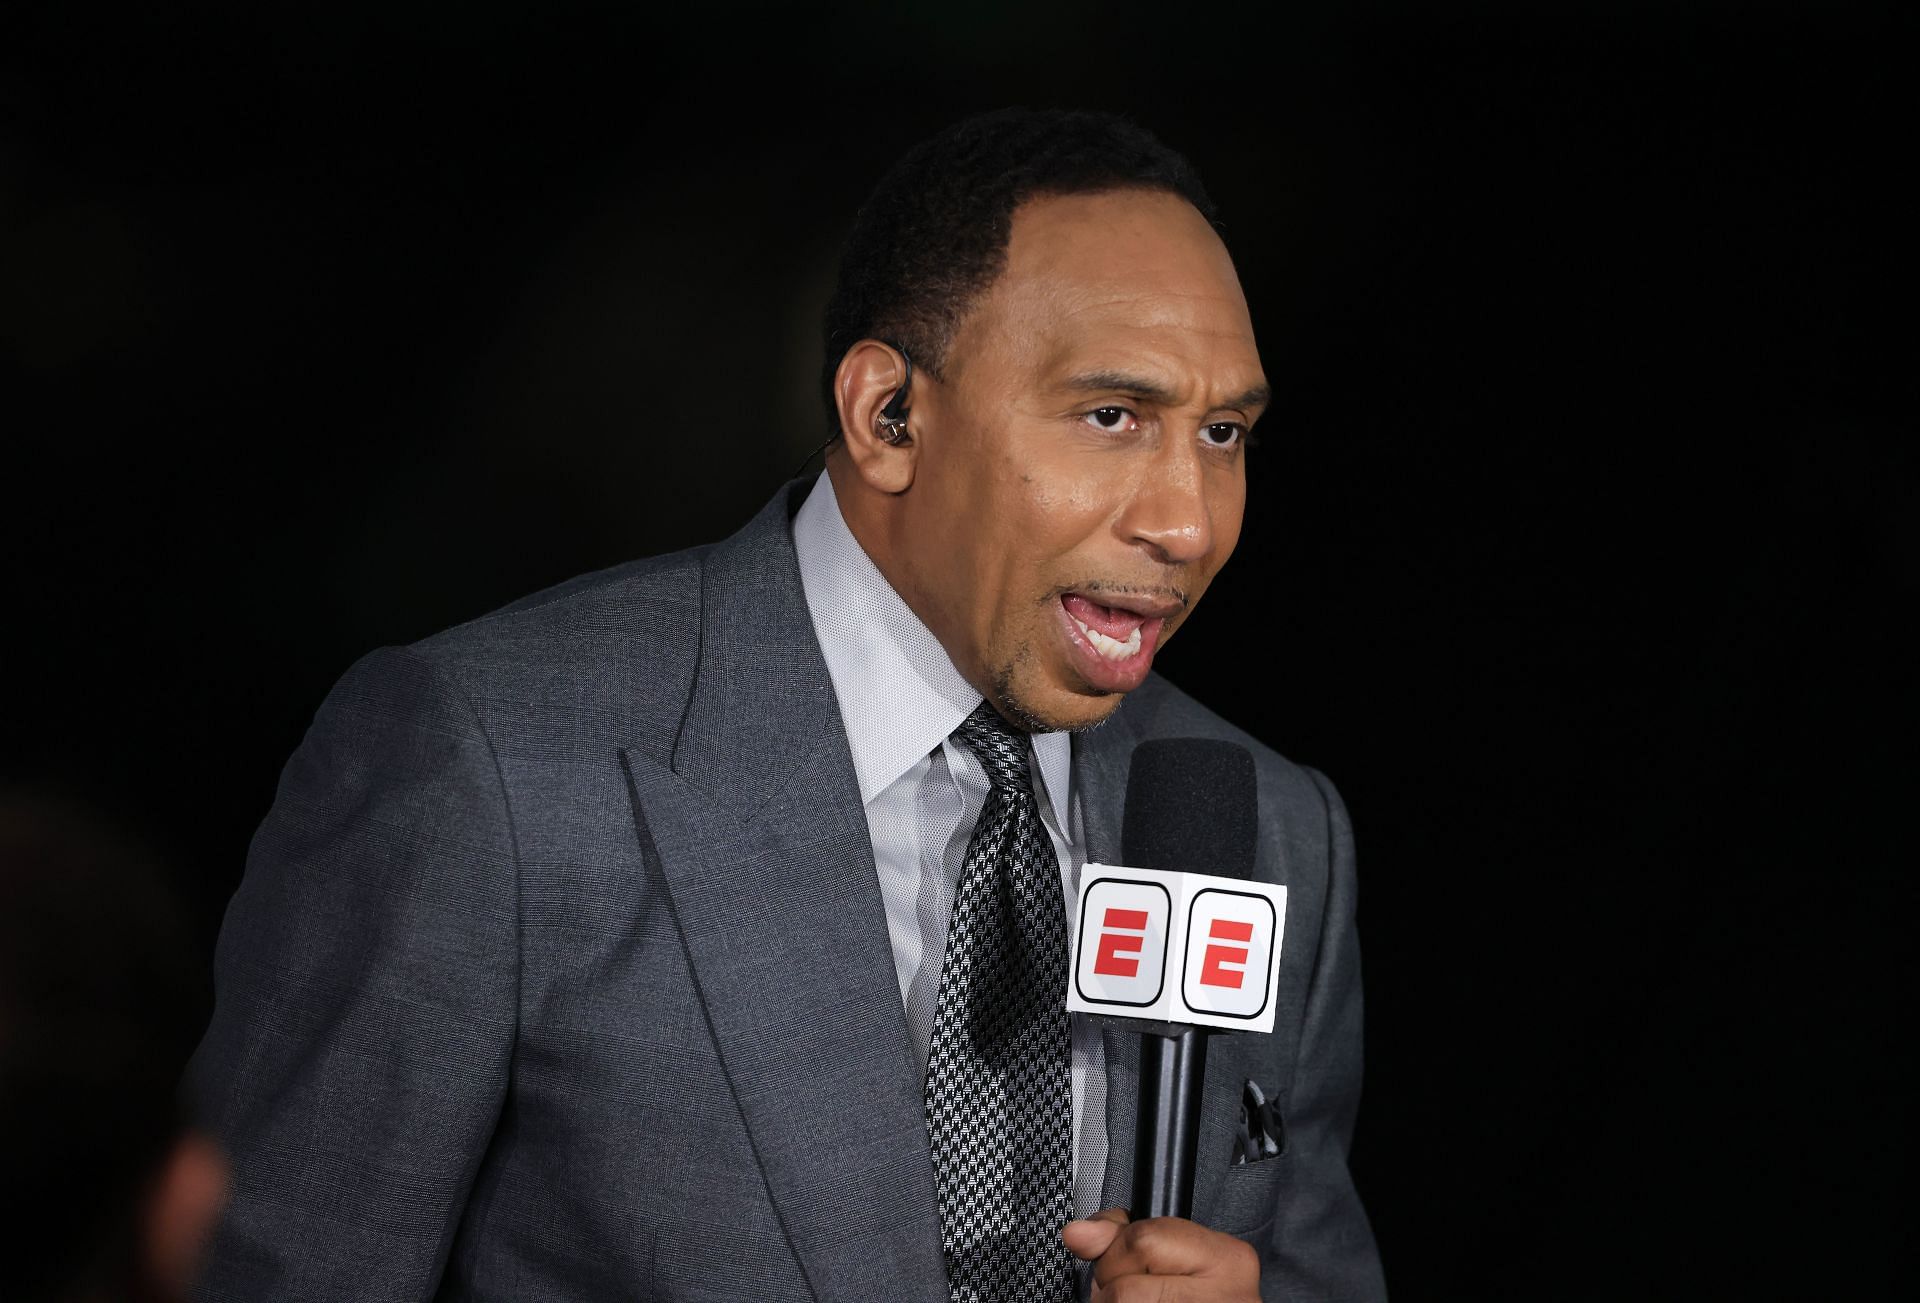 Stephen A Smith had a lot to say